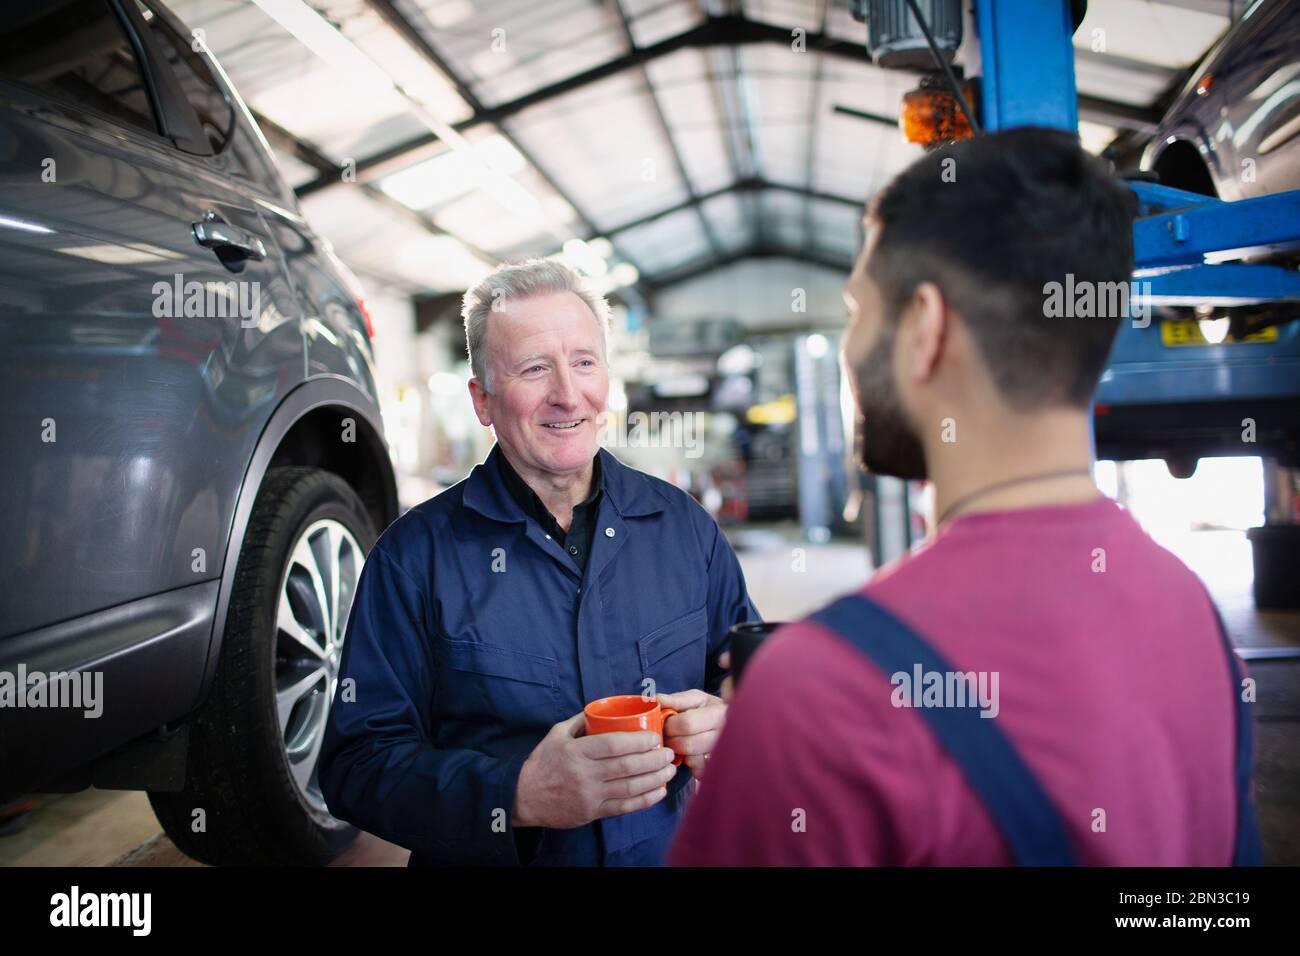 Male mechanics talking and drinking coffee in auto repair shop Stock Photo